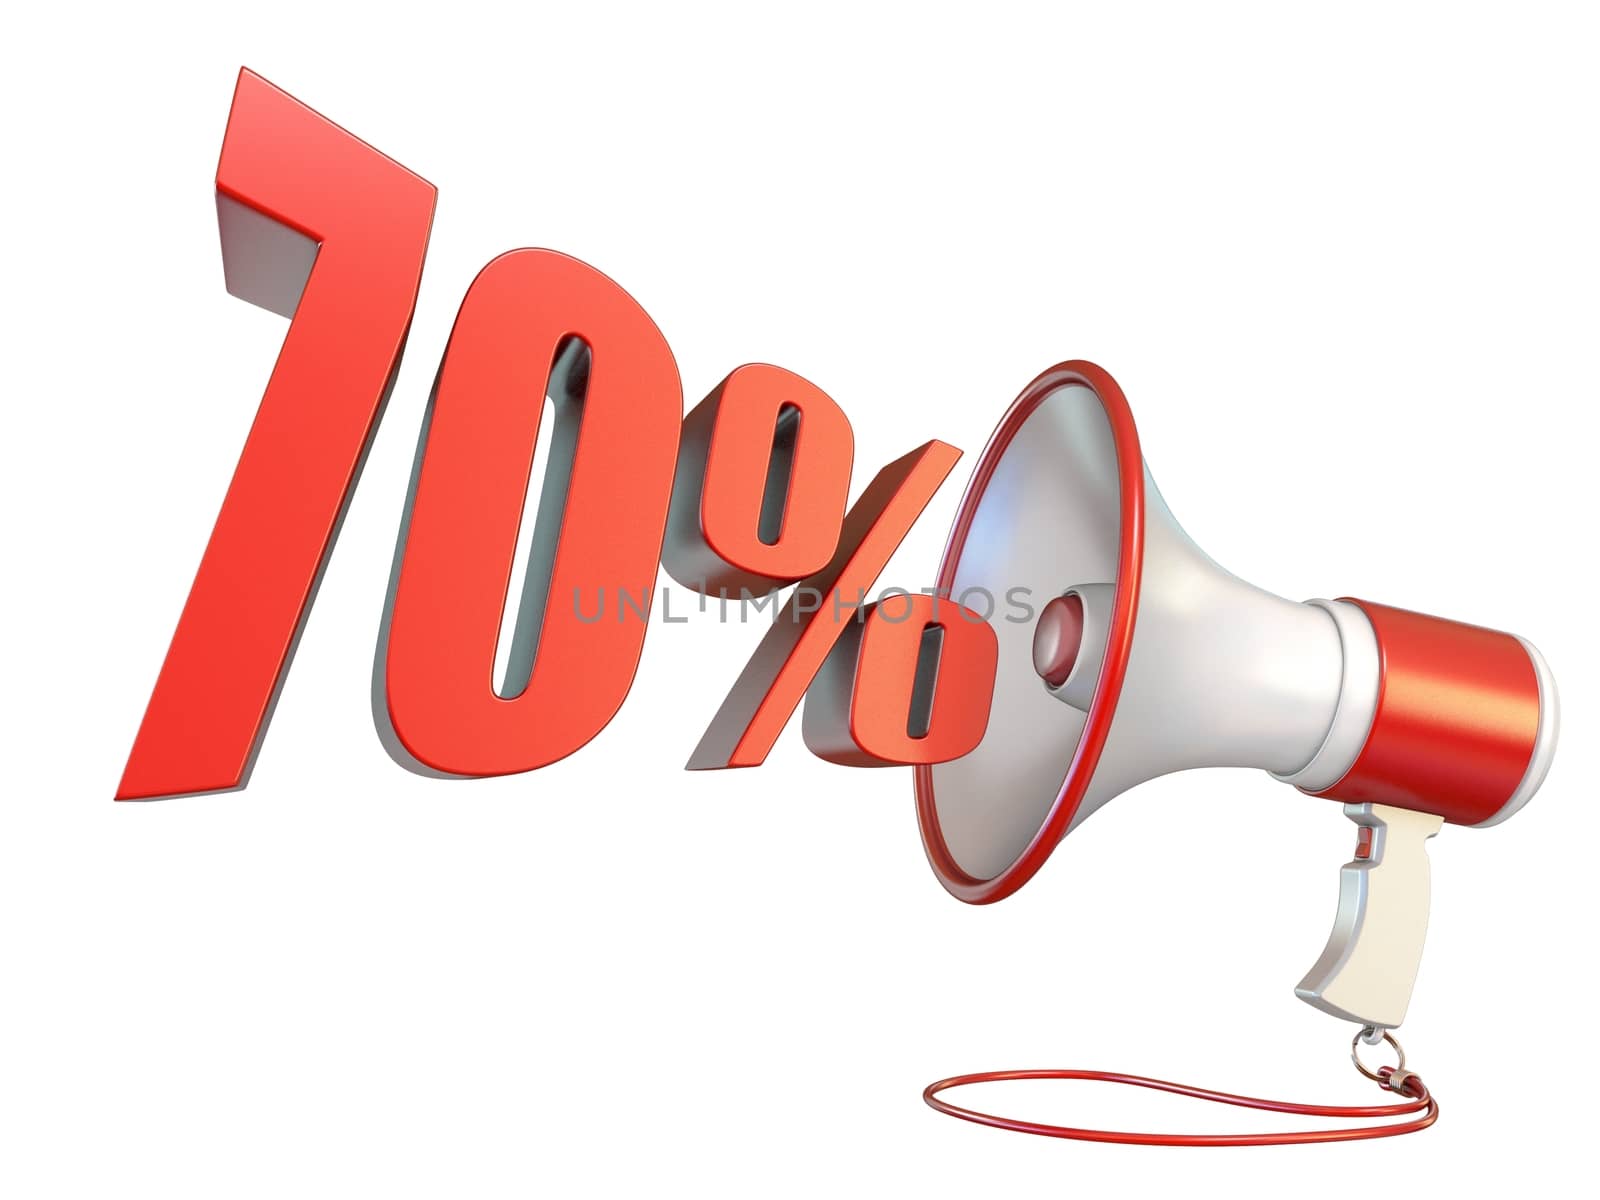 70 percent sign and megaphone 3D rendering illustration isolated on white background